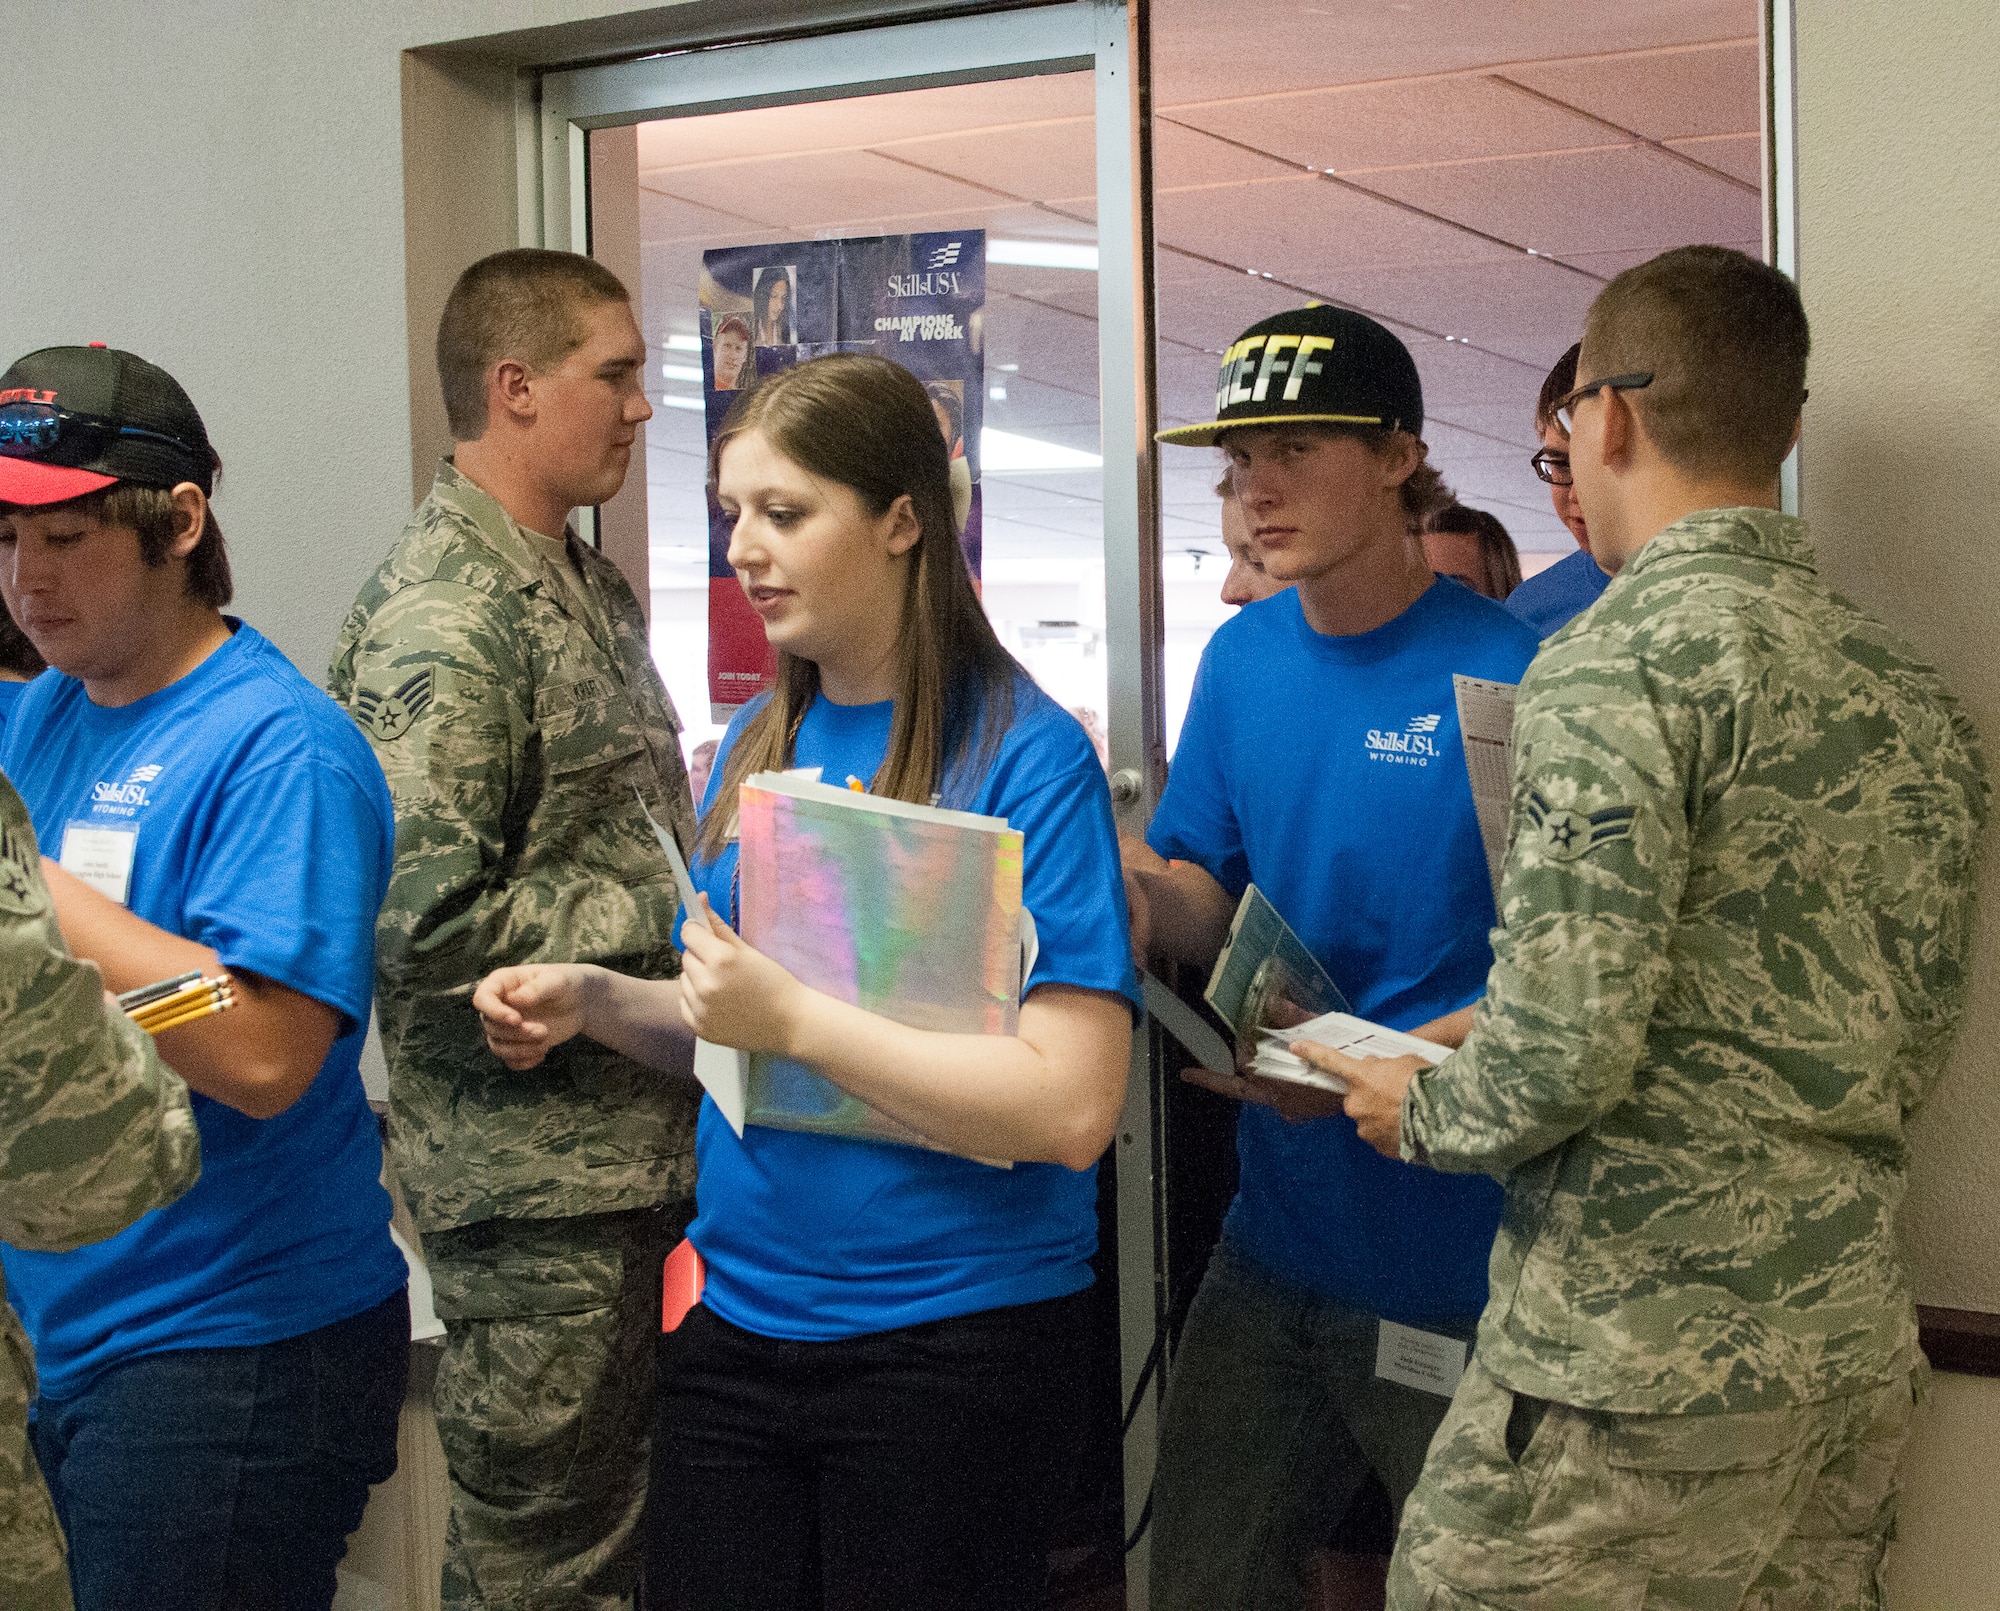 U.S. Air Force Airmen assigned to 153rd Maintenance Group, Wyoming Air National Guard, hand out test materials to students competing in the SkillsUsa competition, Apr. 13, 2015 in Casper, Wyoming. SkillsUSA Wyoming is a career-technical student organization serving students in secondary and post-secondary technical, skilled, service, and health occupations. (U.S. Air National Guard photo by Tech.Sgt John Galvin/released)